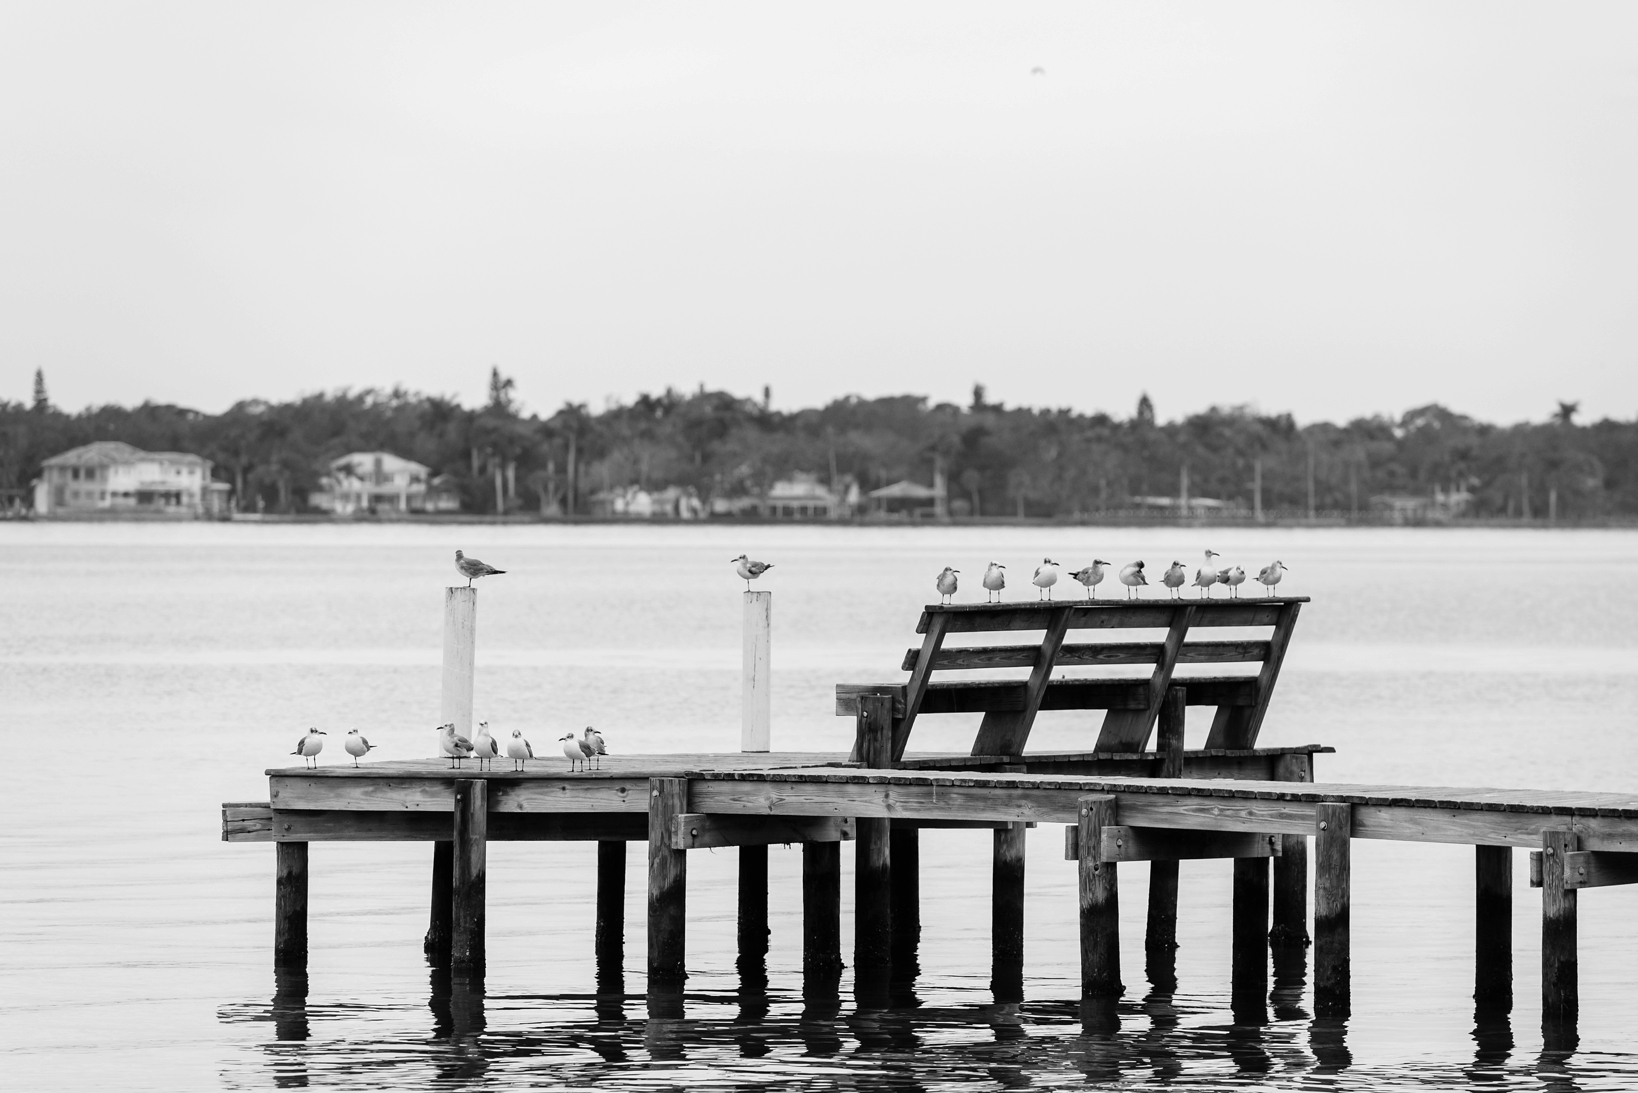 Birds lined up along the bench of a dock watching the bride and groom during their portraits